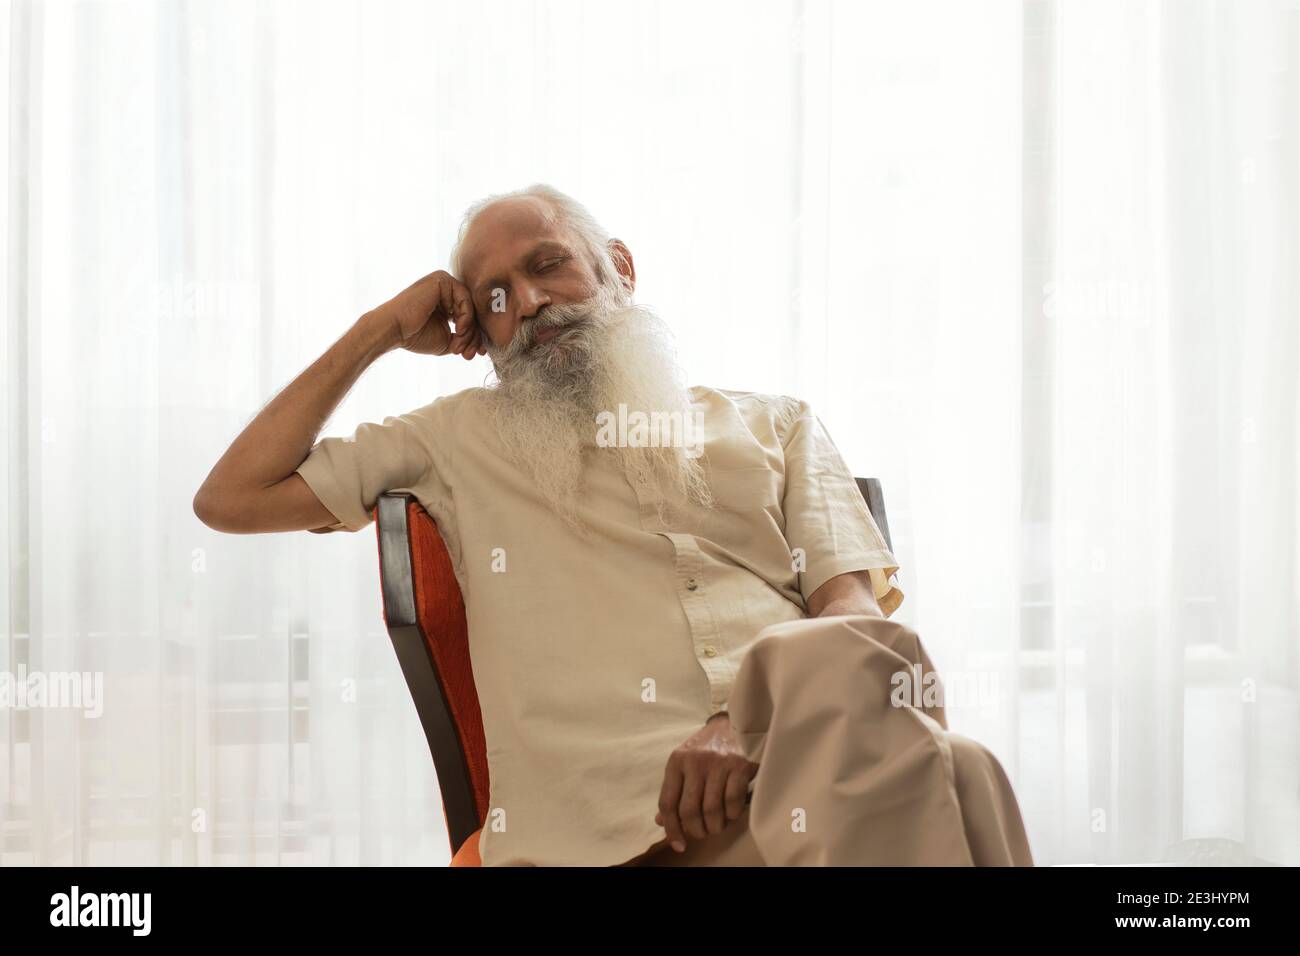 AN OLD MAN SITTING AND RESTING ON CHAIR Stock Photo